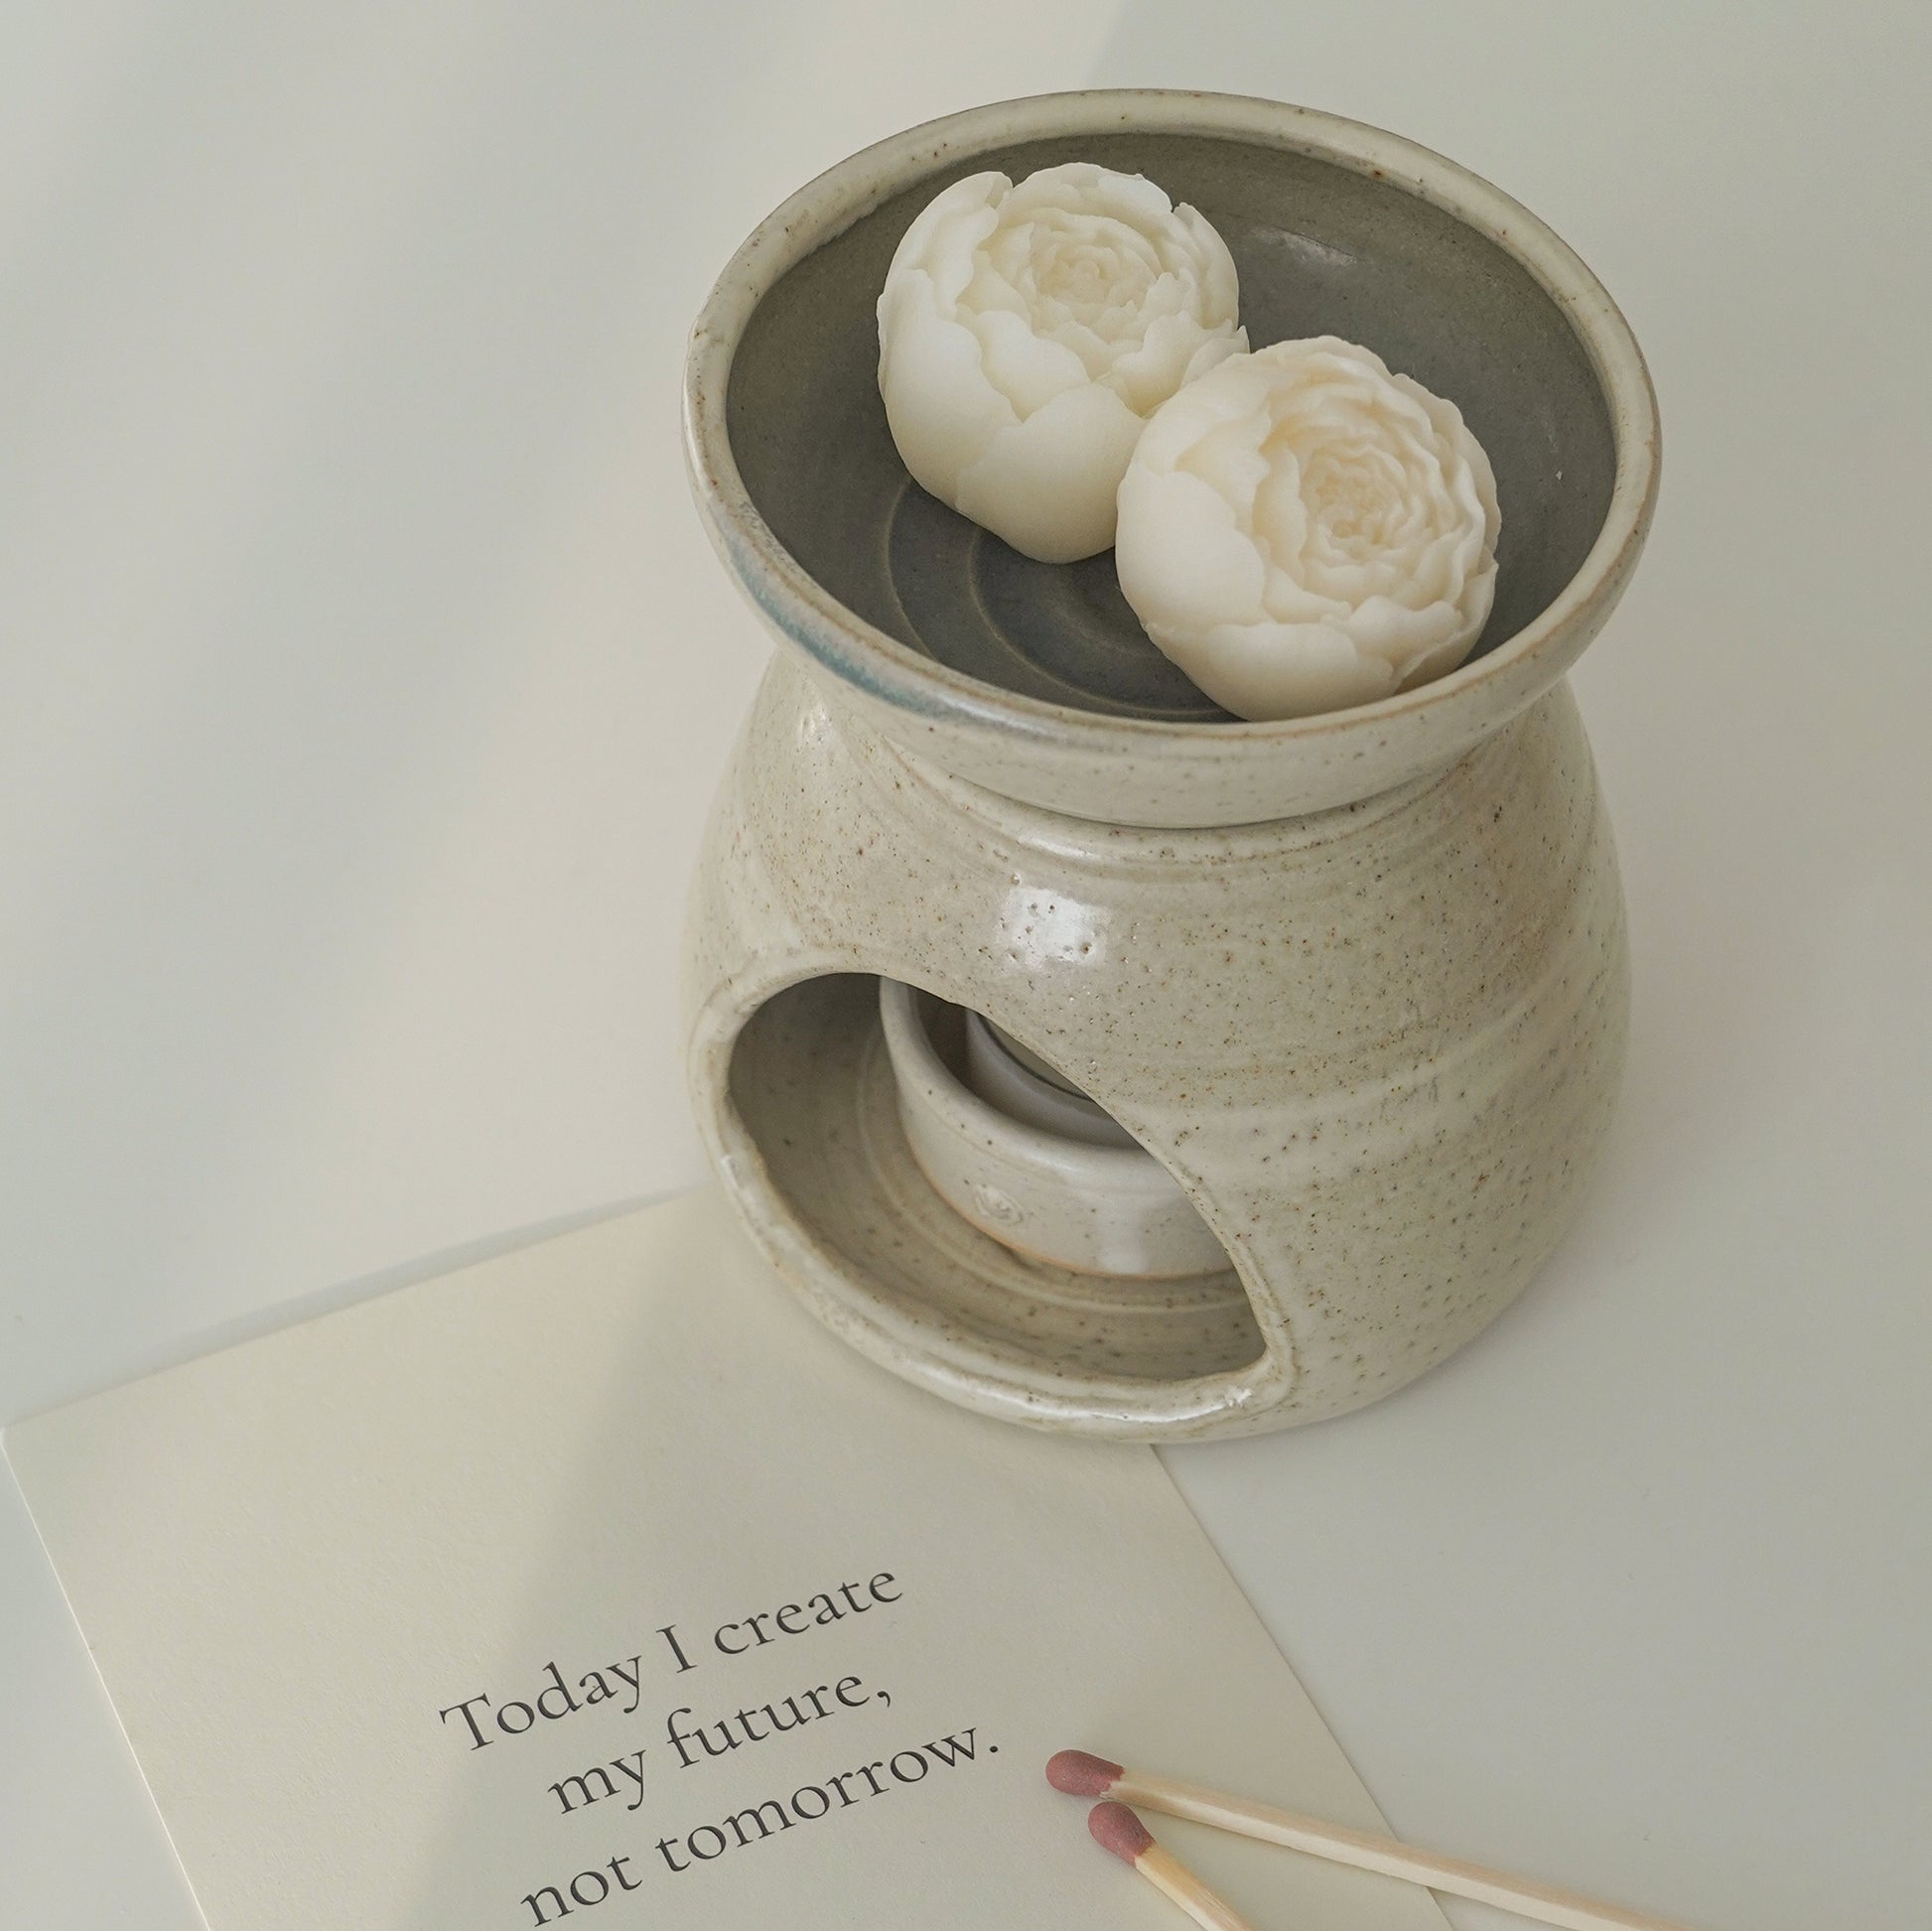 peony flower wax melts in a wax warmer, a white postcard inscribed with "Today I create my future, not tomorrow.", and brown matches